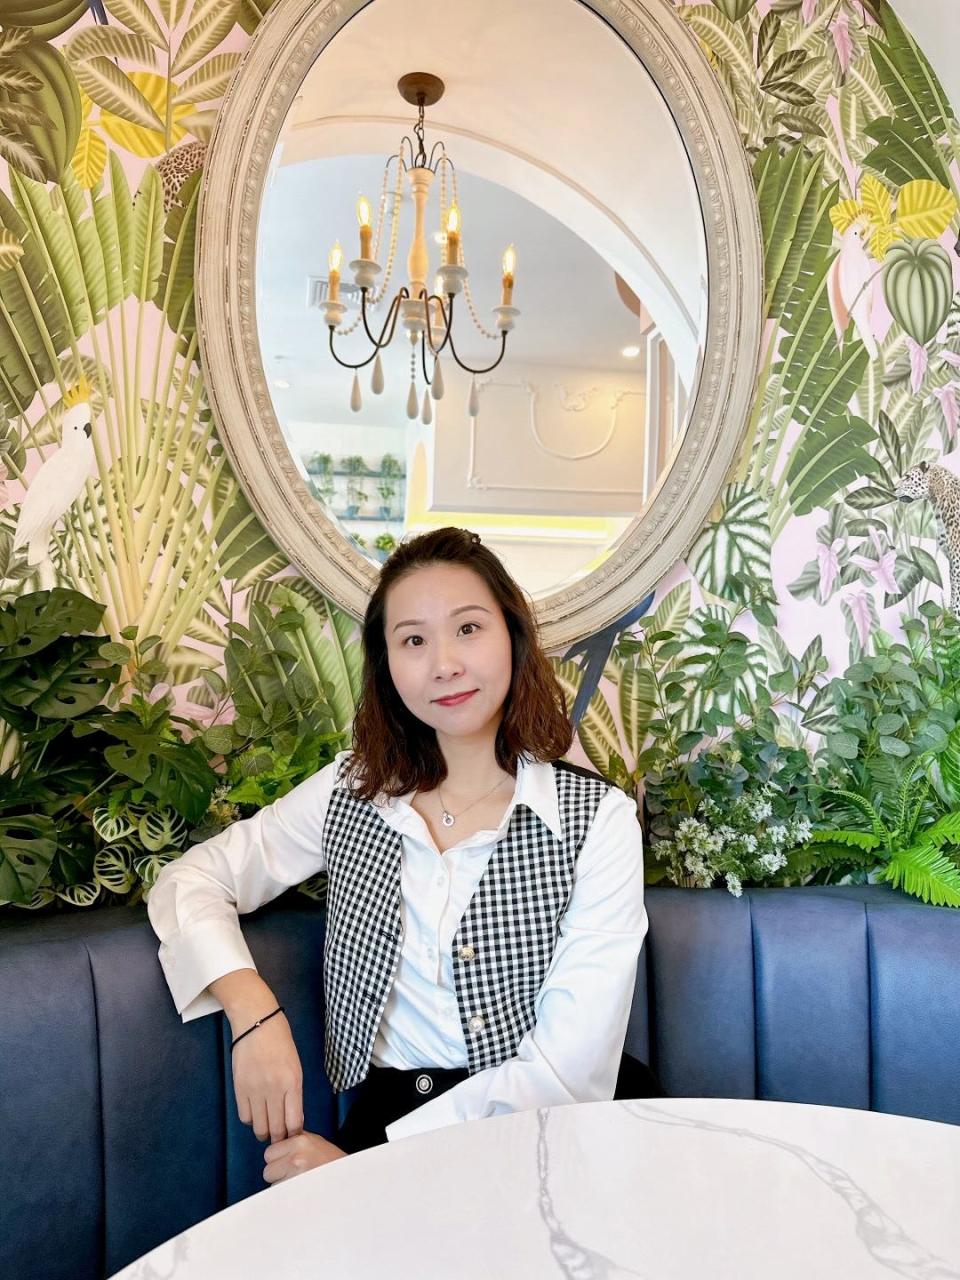 Sophia Chen of Cherry Hill is one of two owners of the new Prince Tea House in Marlton. Her business partner is Austin Lee.